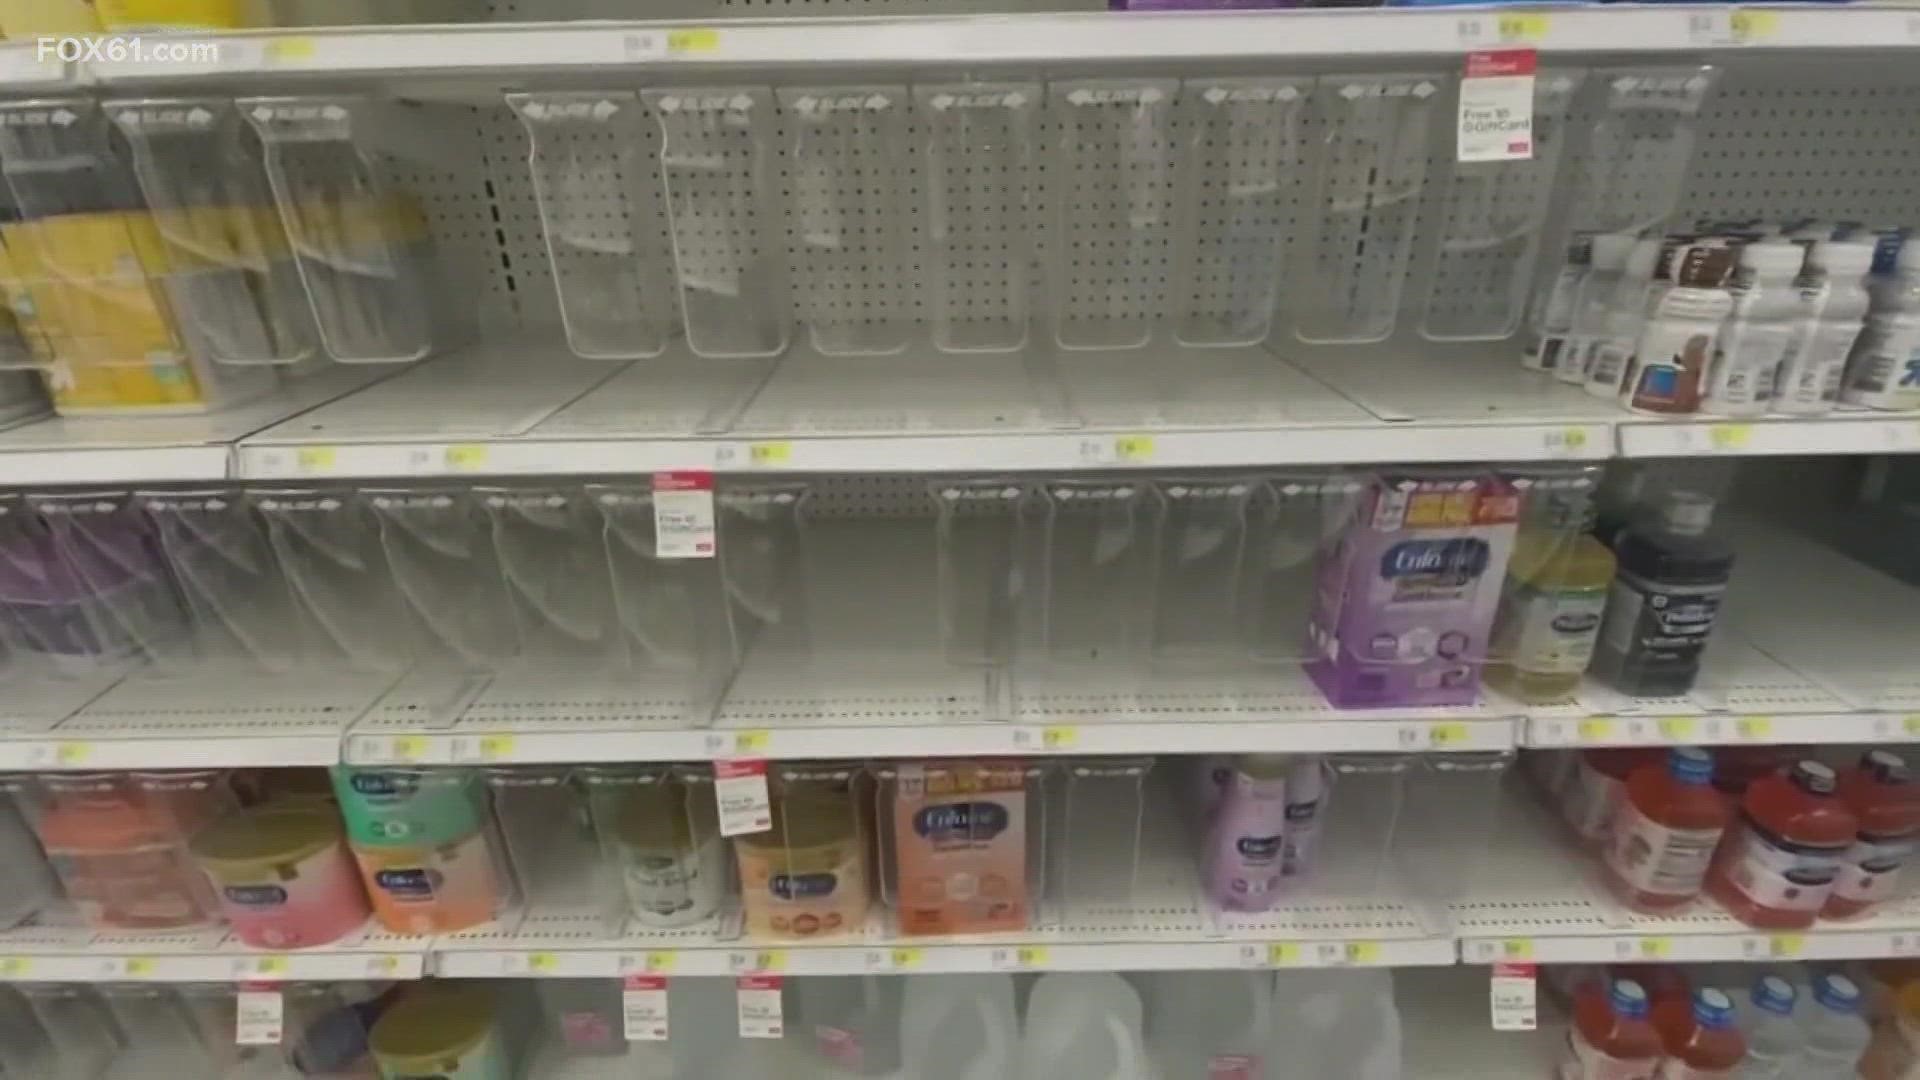 Baby formula and diaper shelves are beginning to look emptier, so organizations that help families with free diapers, formulas, and baby supplies are working to keep